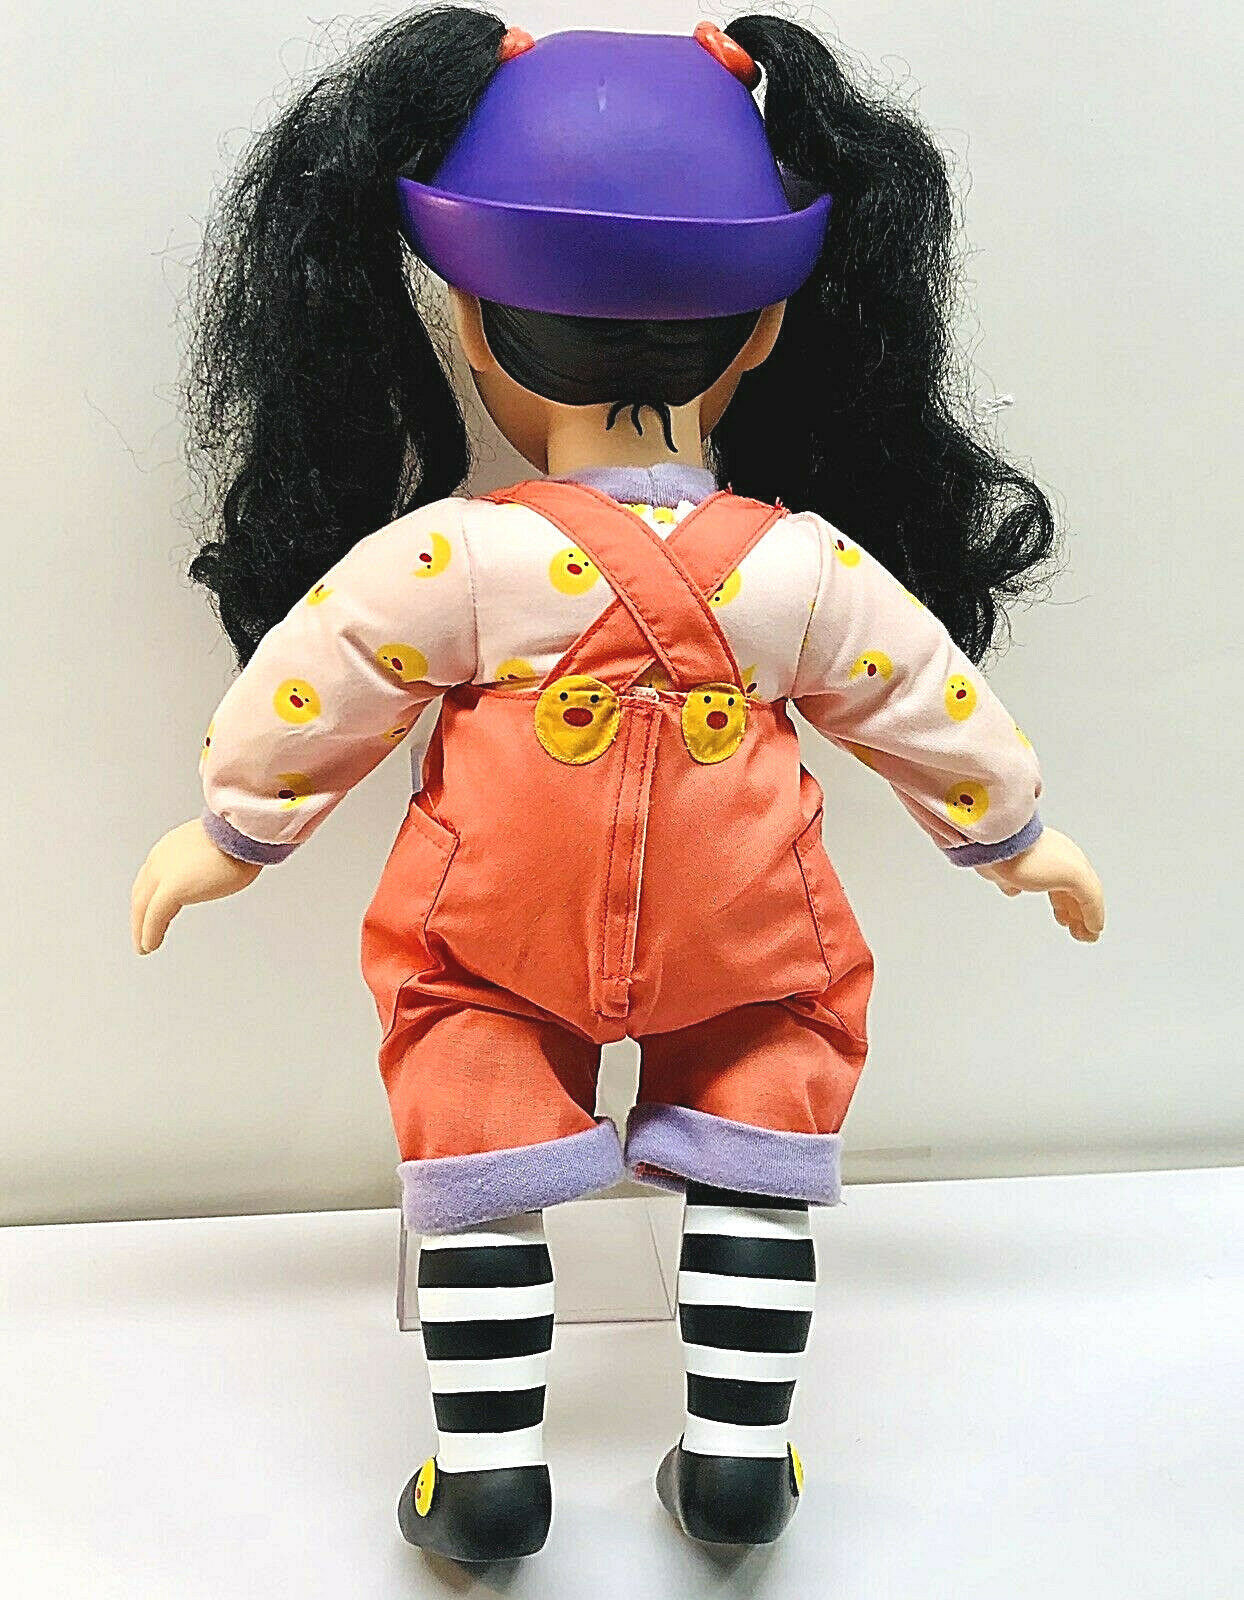 Big Comfy Couch 1996 Playmates Talking Loonette Doll Vinyl ...